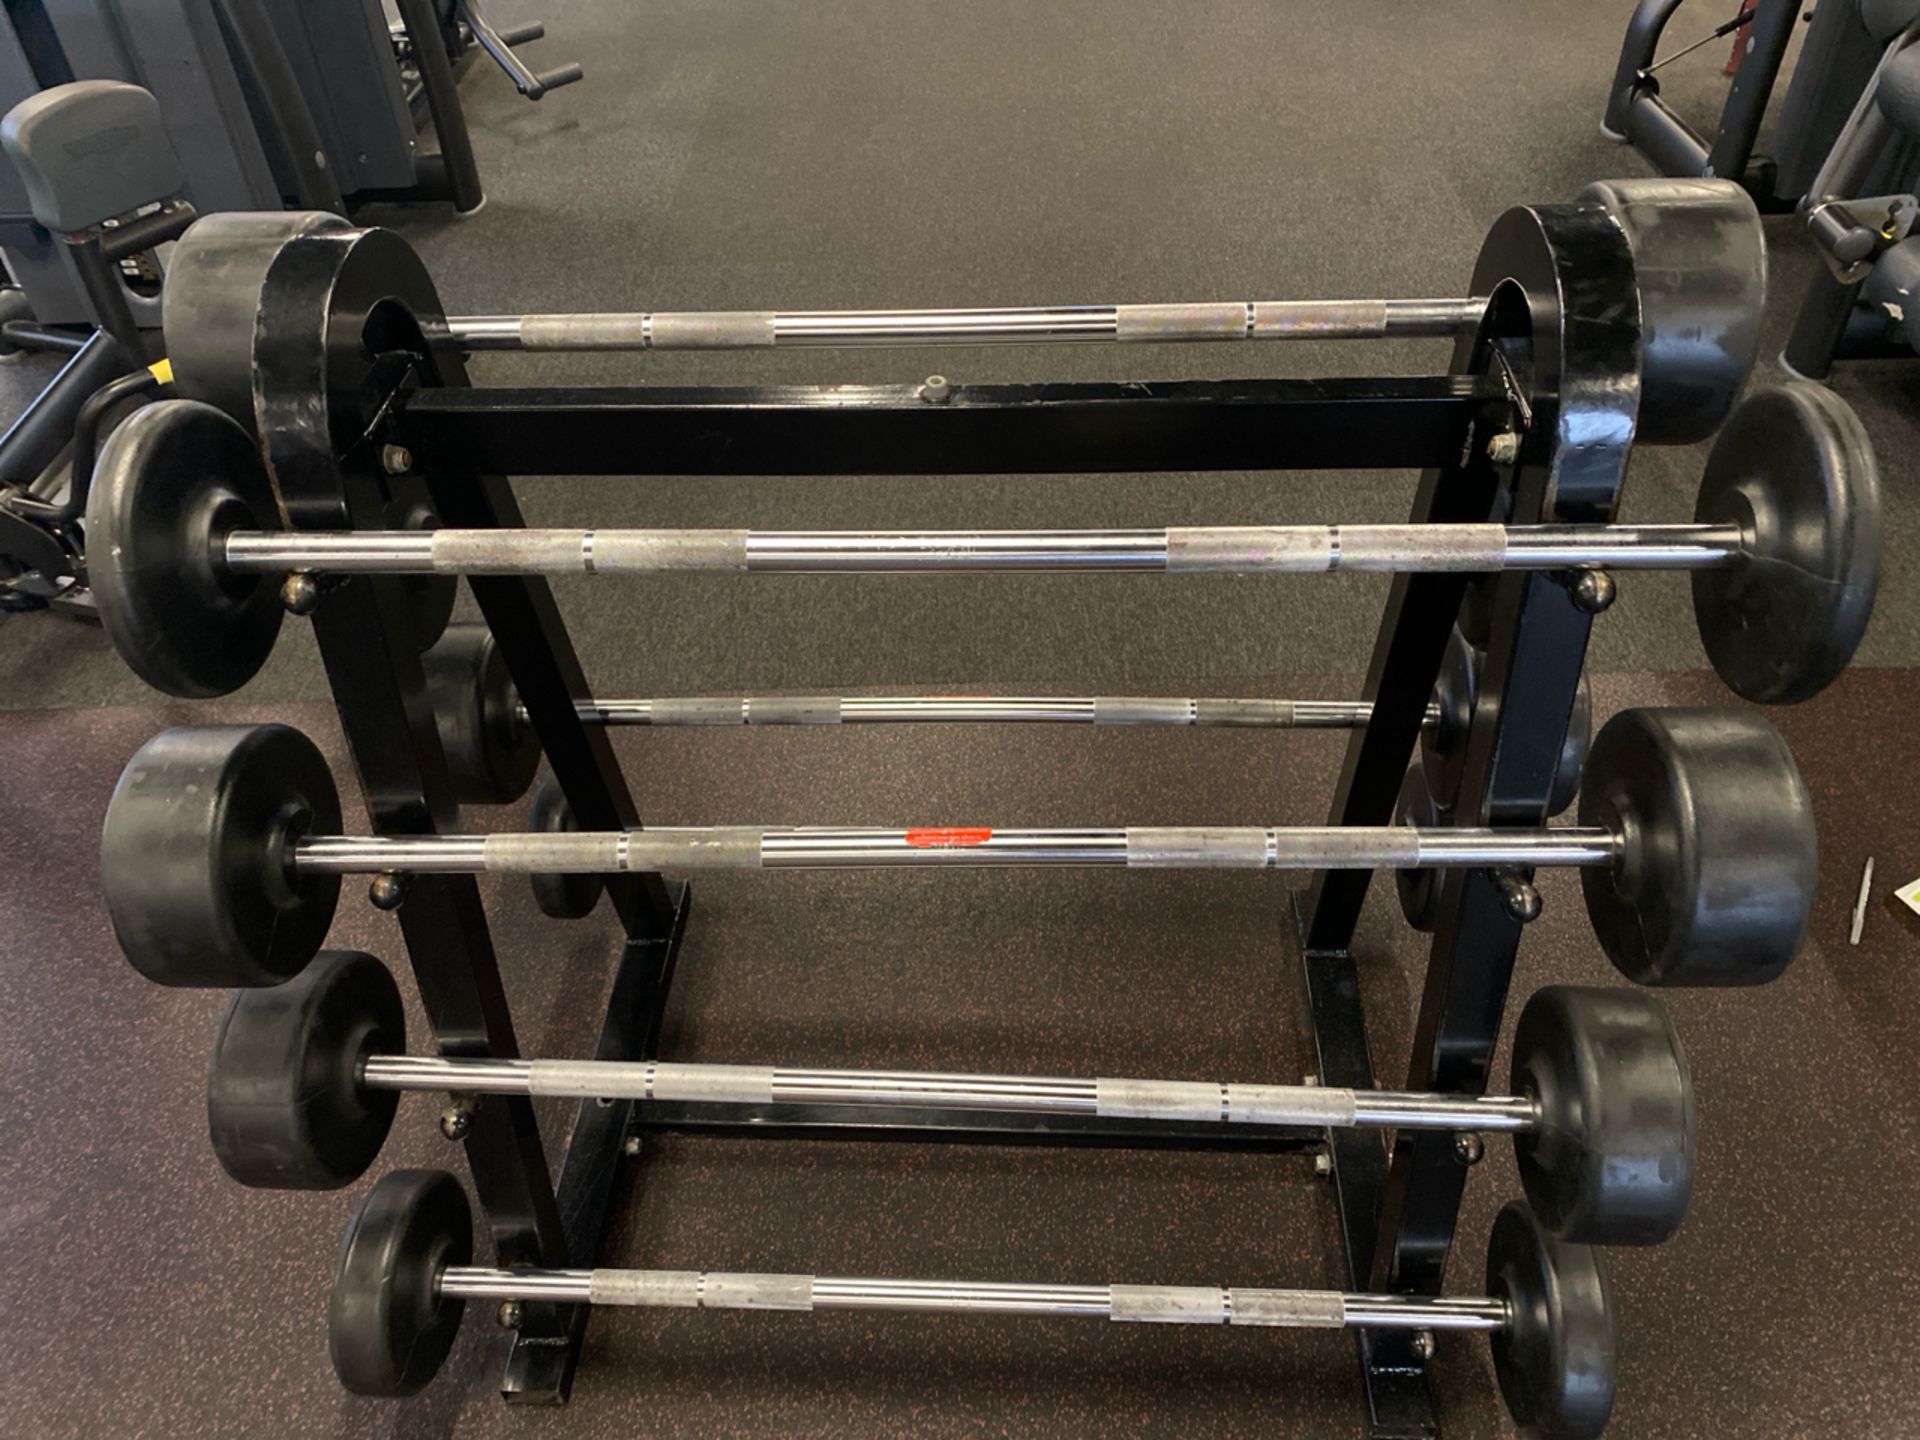 Force Weights & Bench - Image 5 of 6